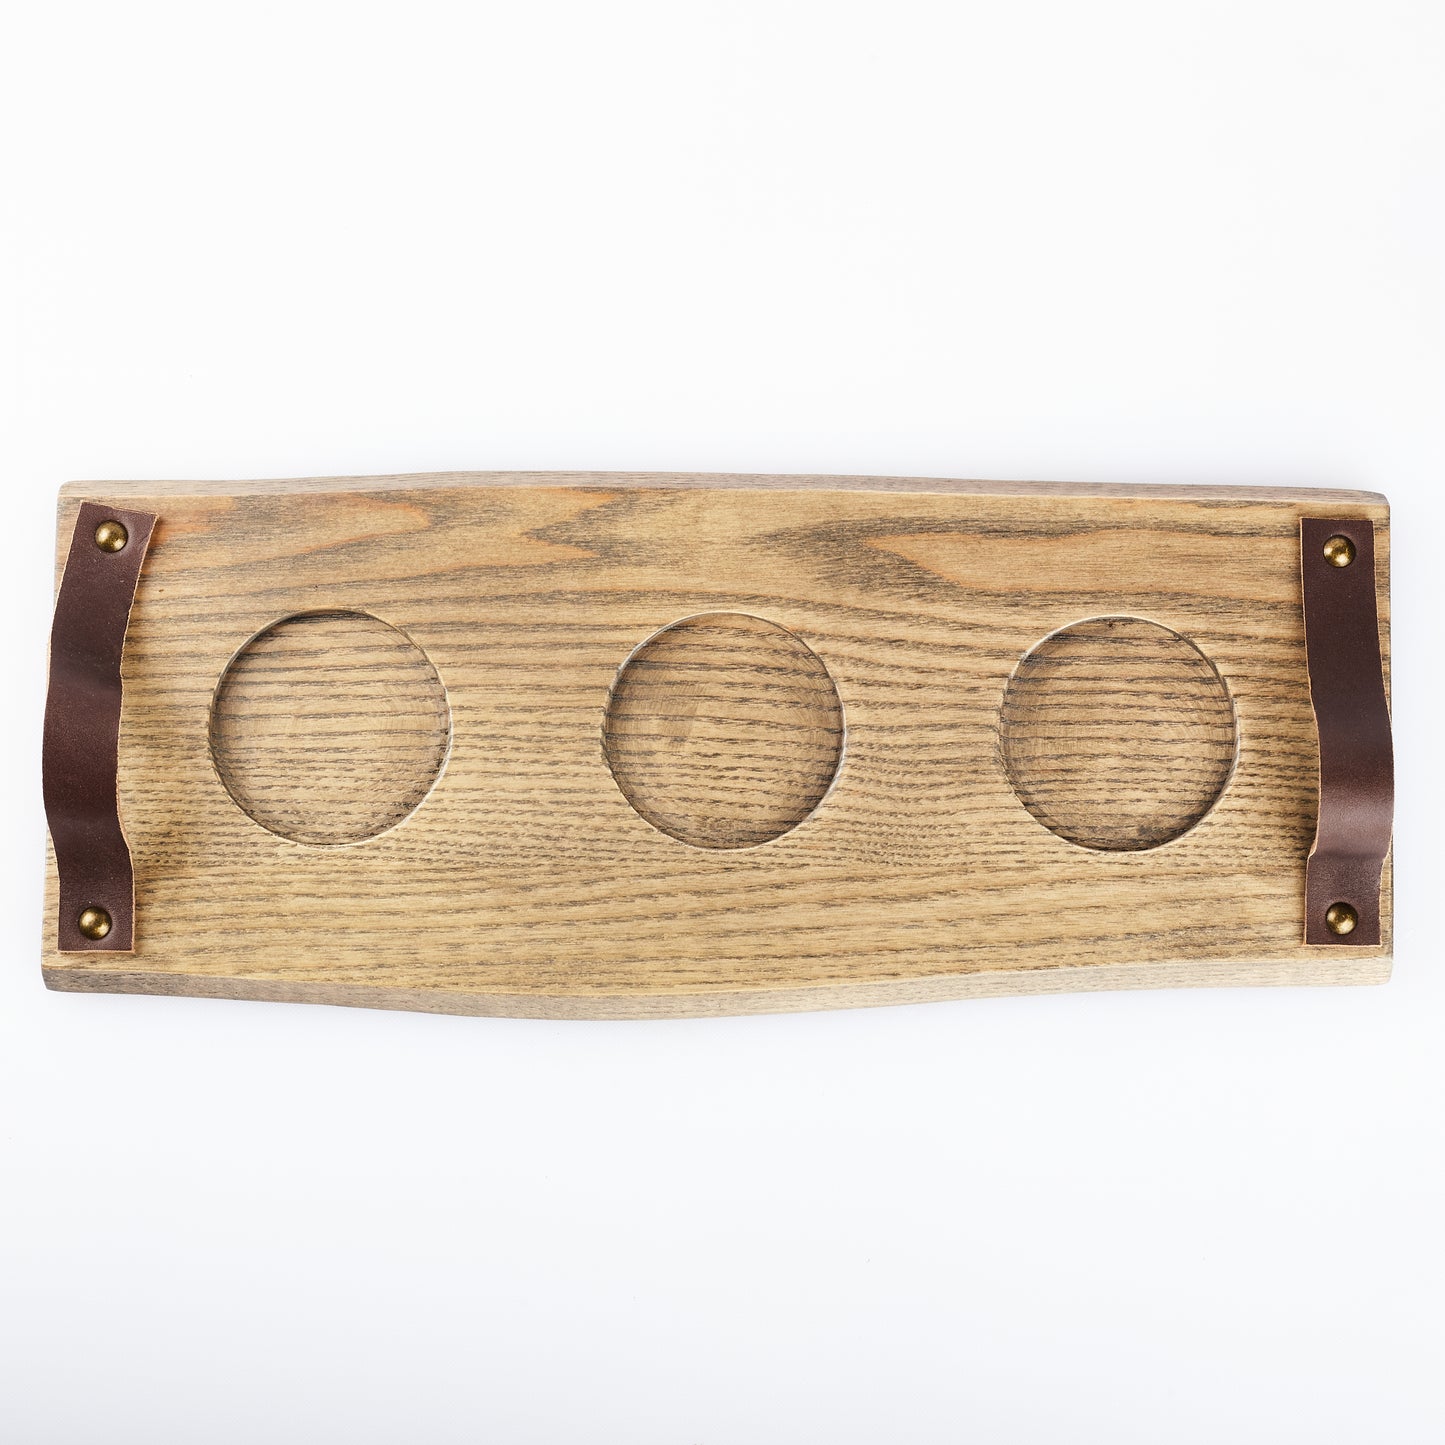 Limited - Wooden Serving Platter with Leather Handles